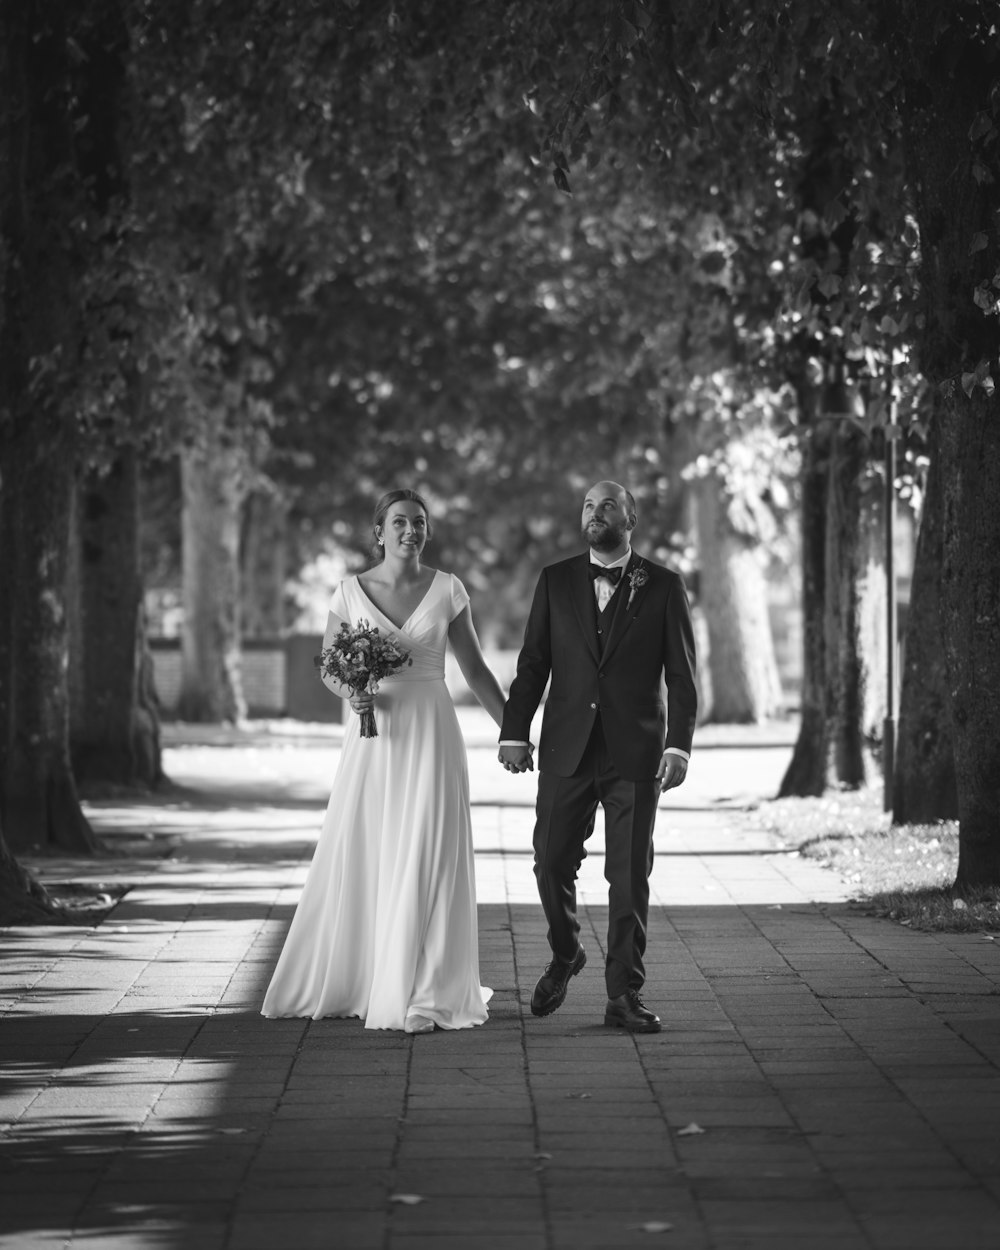 a bride and groom walking down a sidewalk holding hands